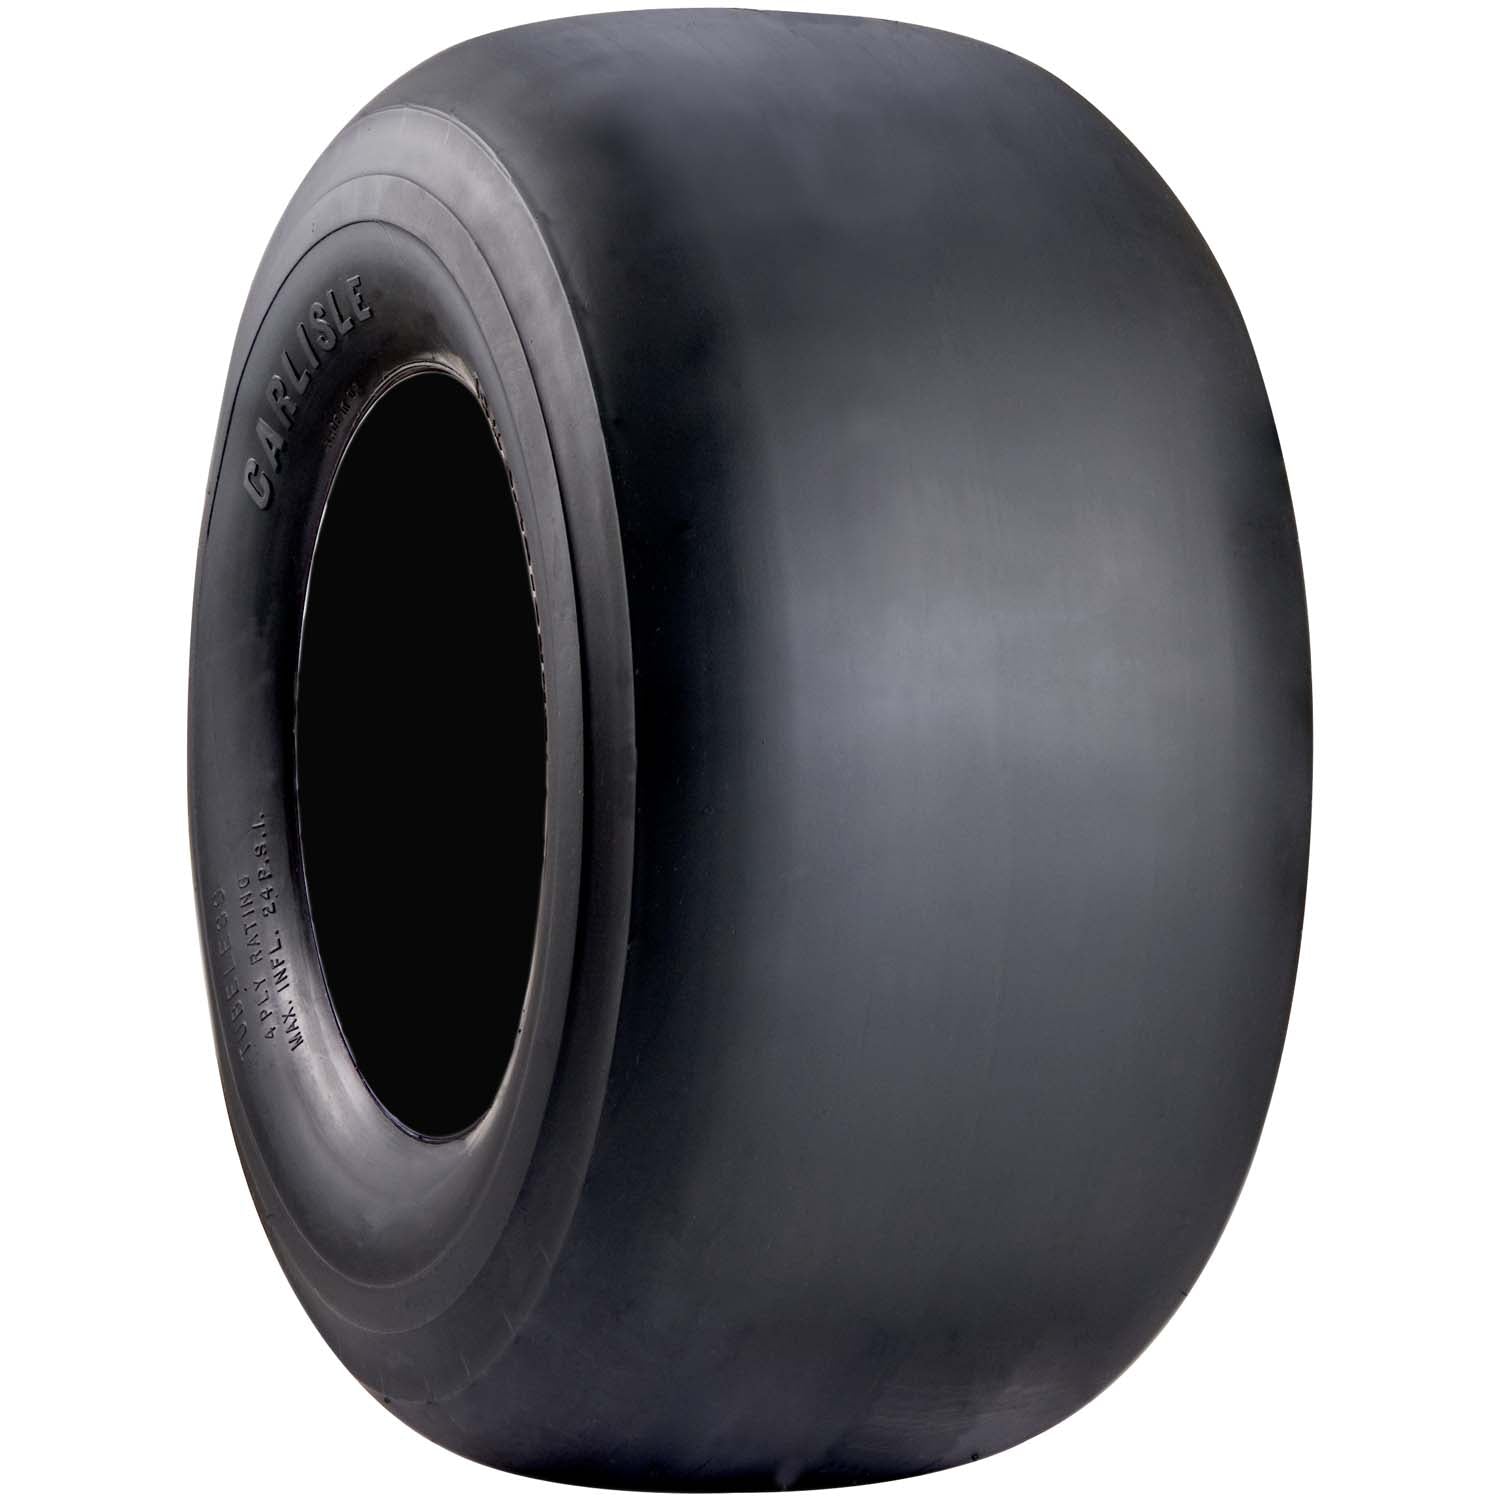 Carlisle Smooth Lawn and Garden Tire 4ply 18x9.50-8